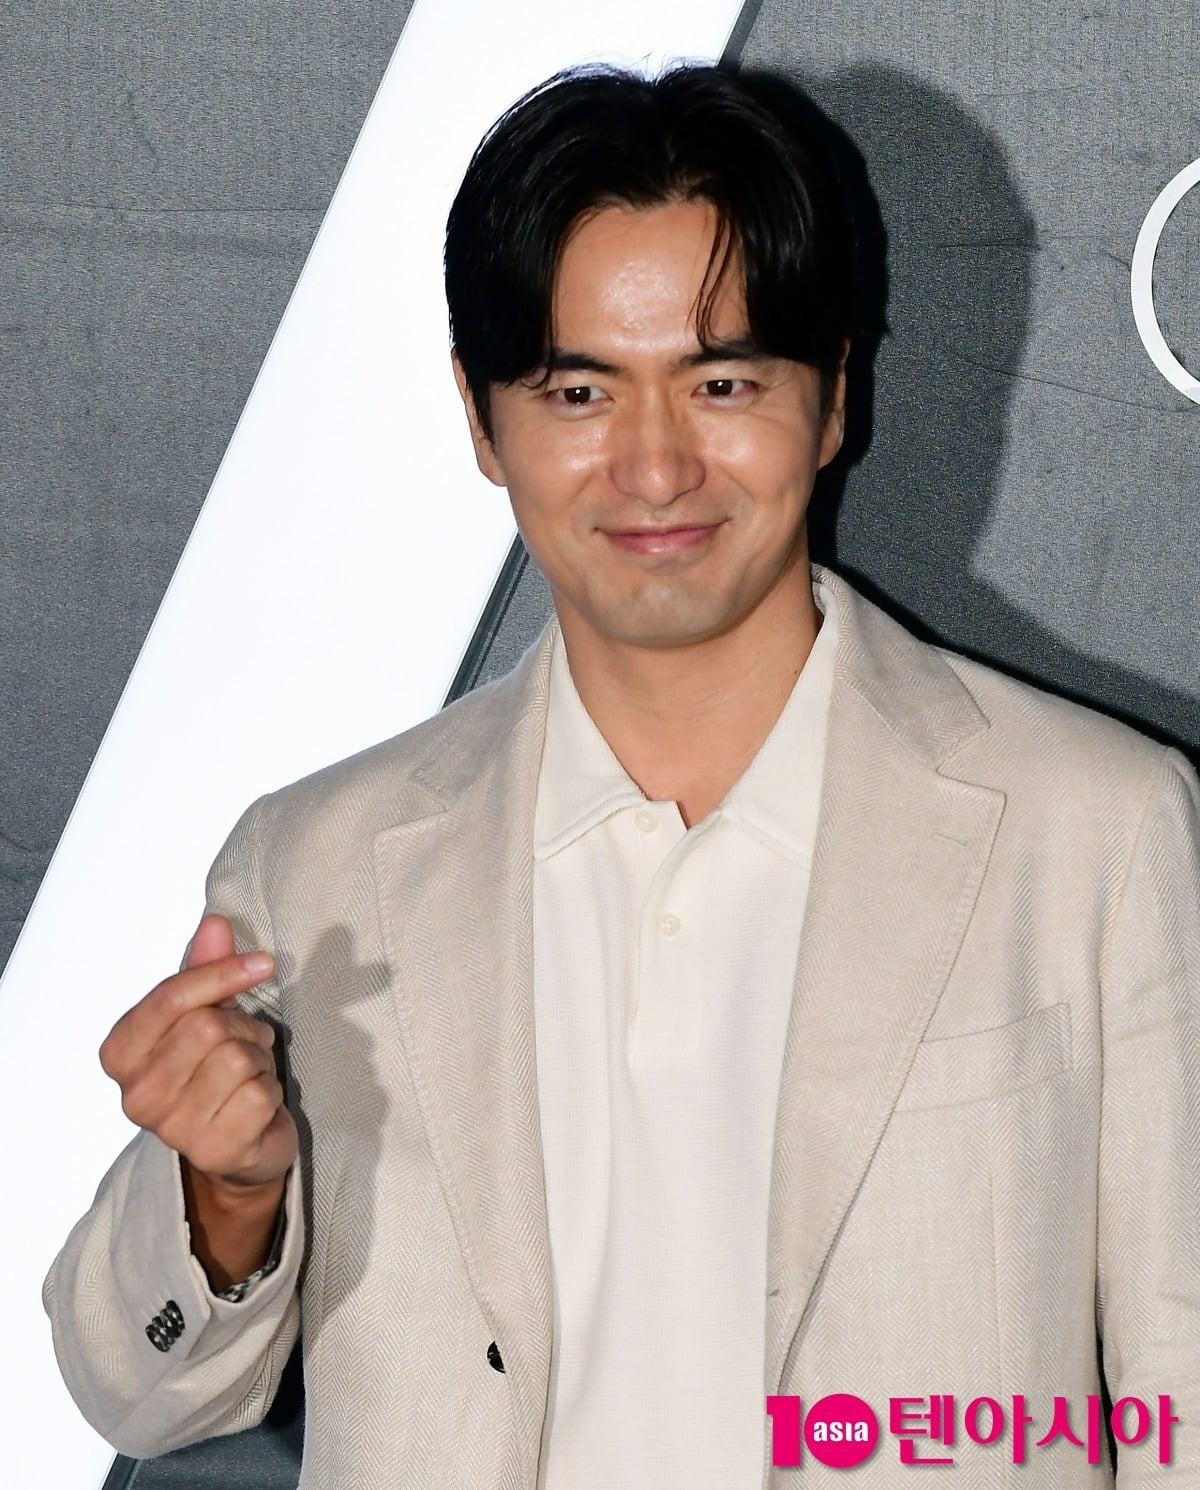 Lee Jin-wook, "I had a hard time acting with Song Kang, so I told him to exercise less."